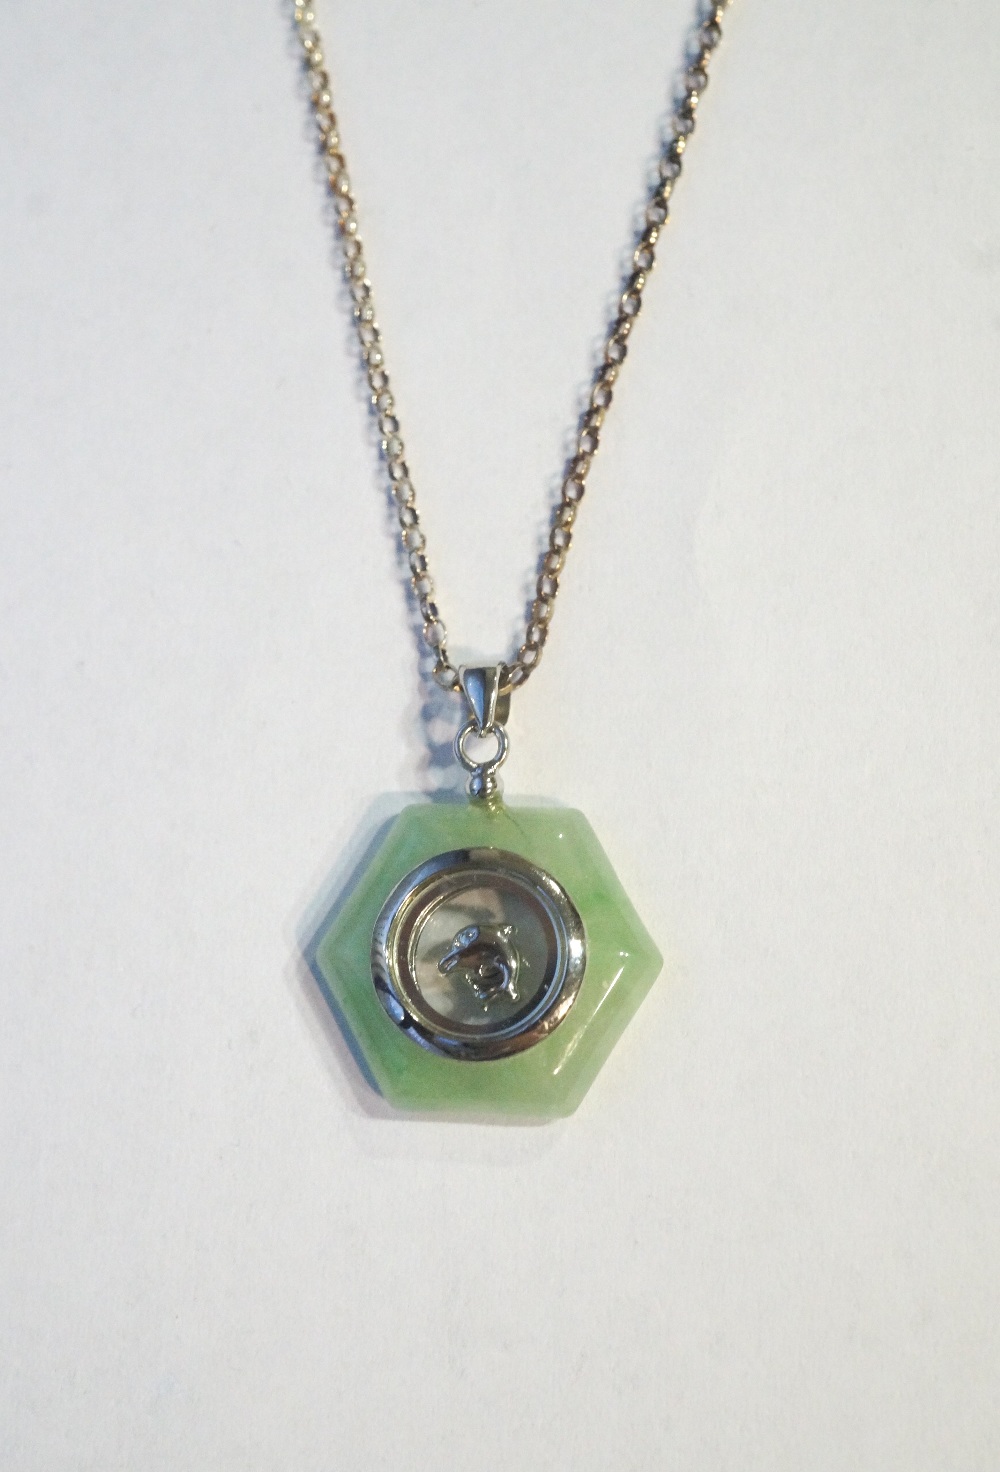 JADE AND SILVER PENDANT - Image 2 of 2